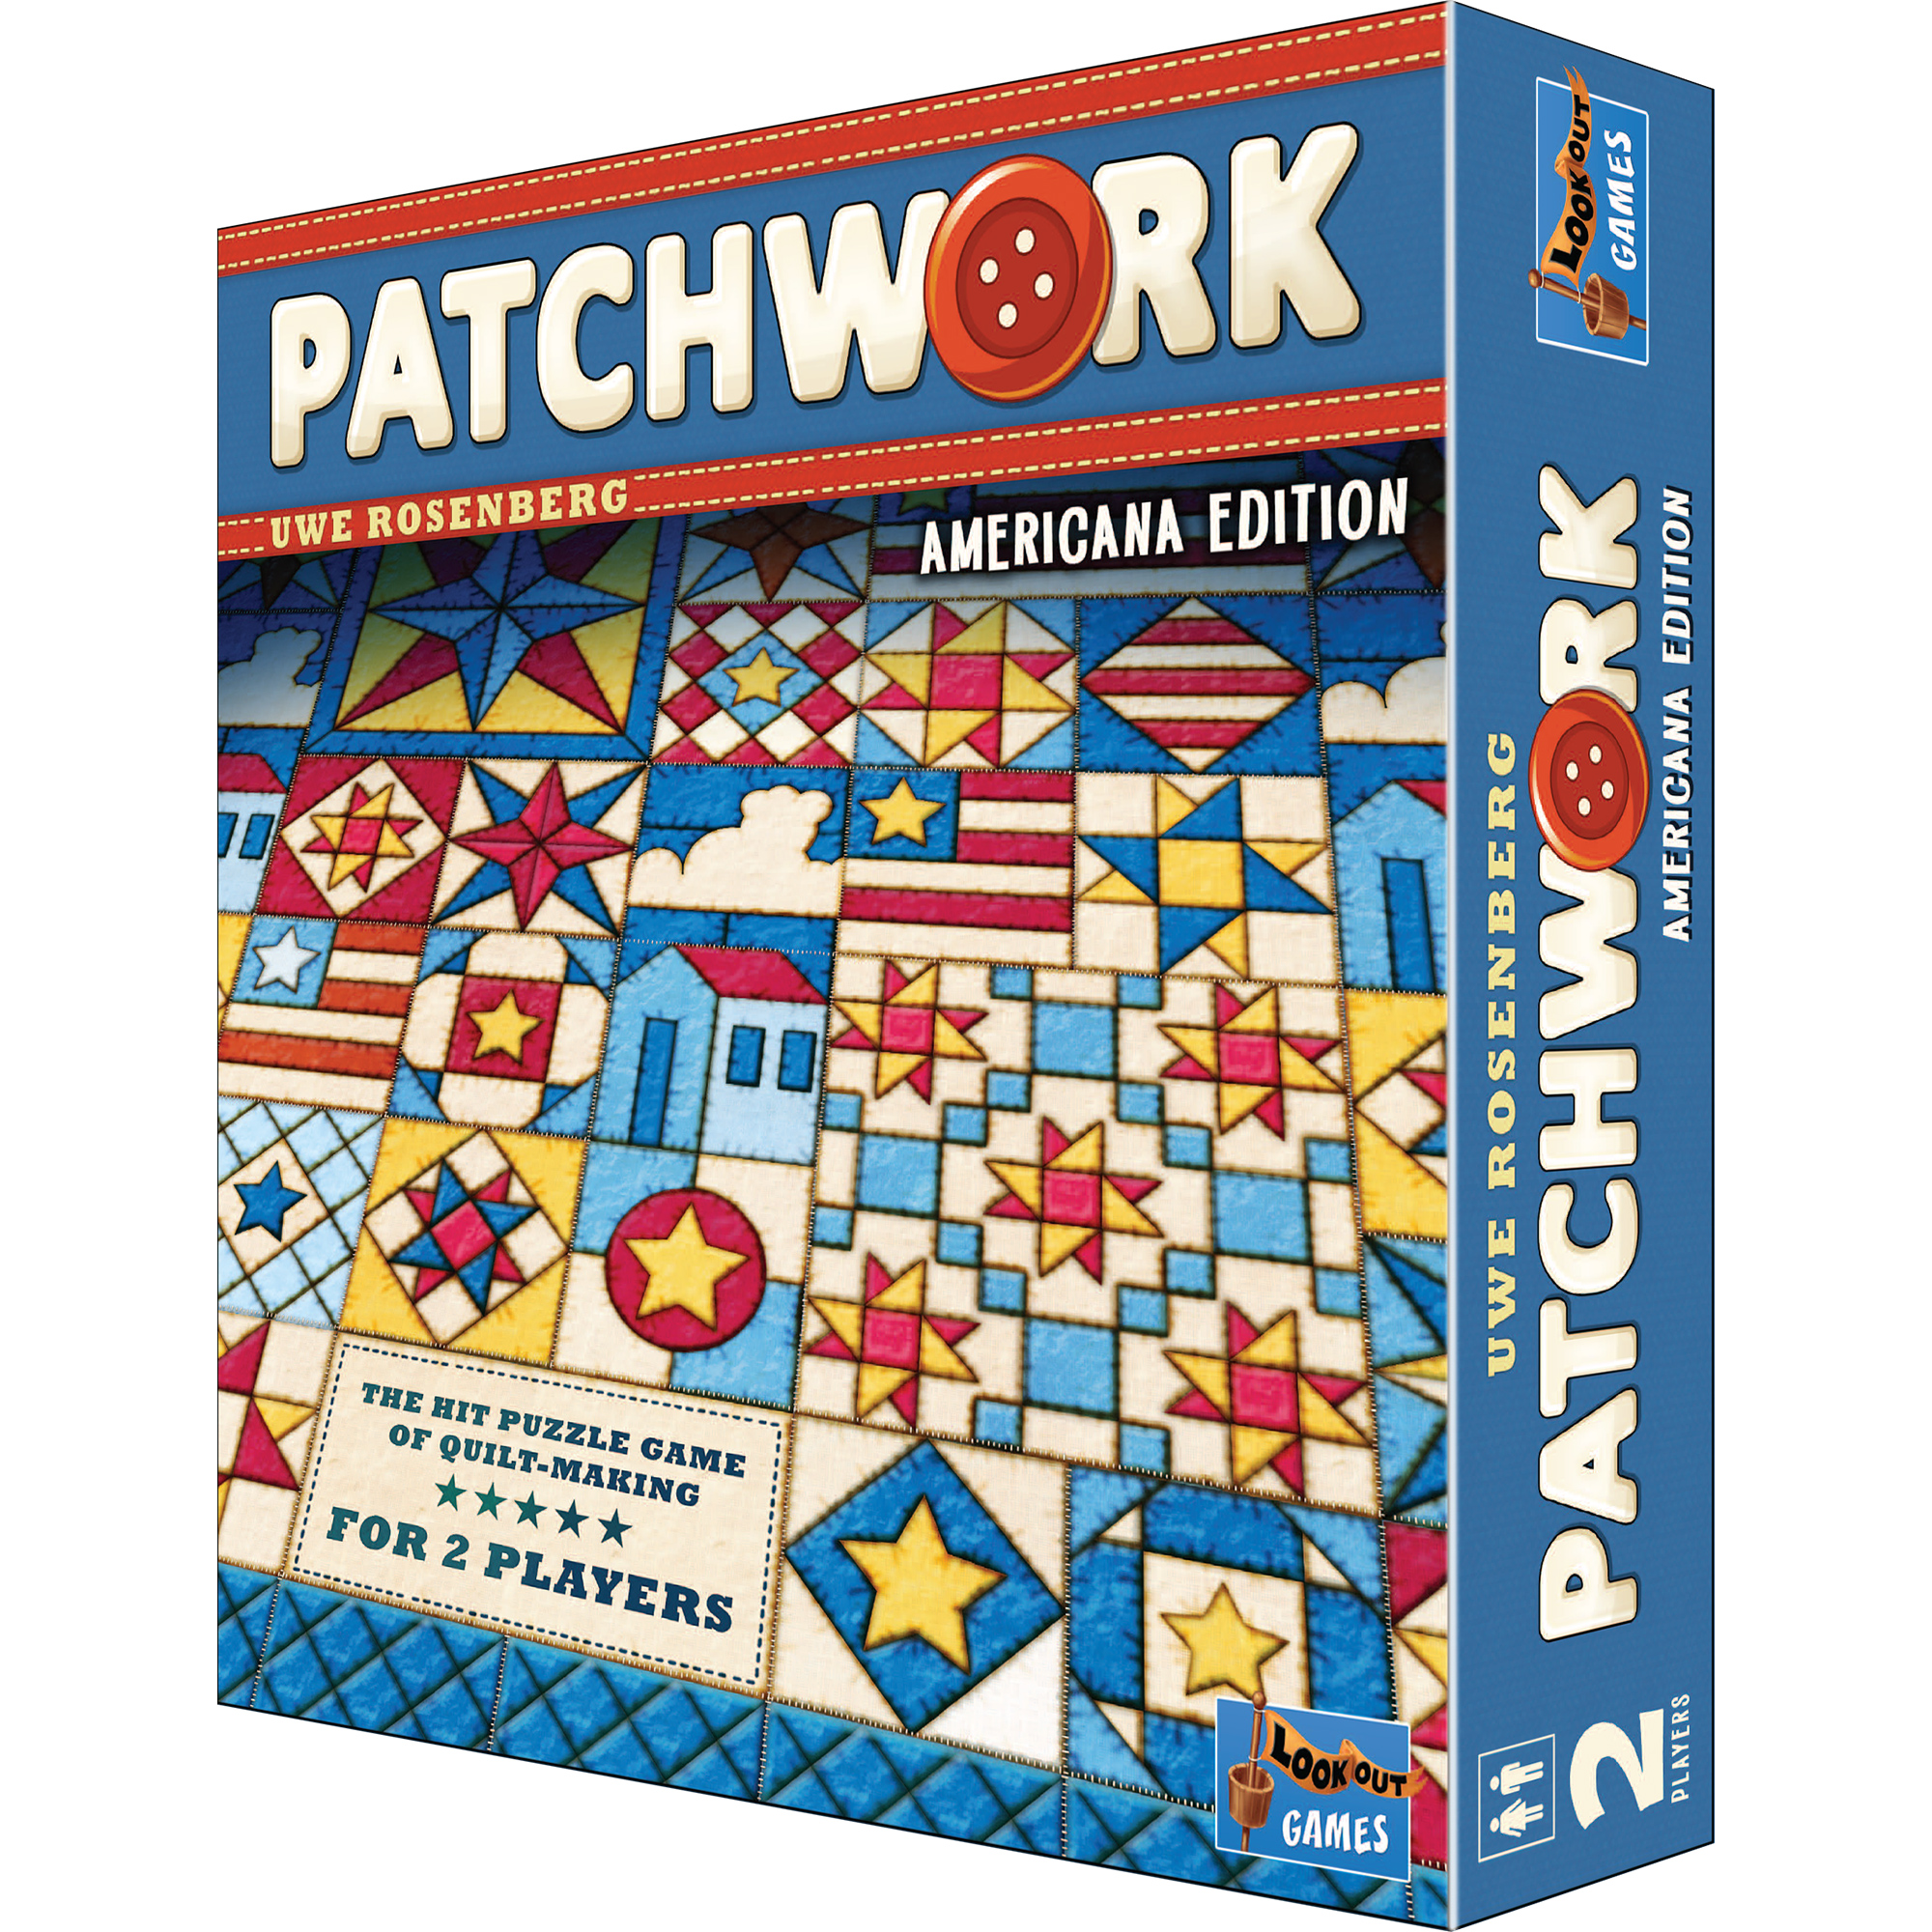 Patchwork Americana Family Board Game for Ages 8 and up, from Asmodee - image 5 of 5